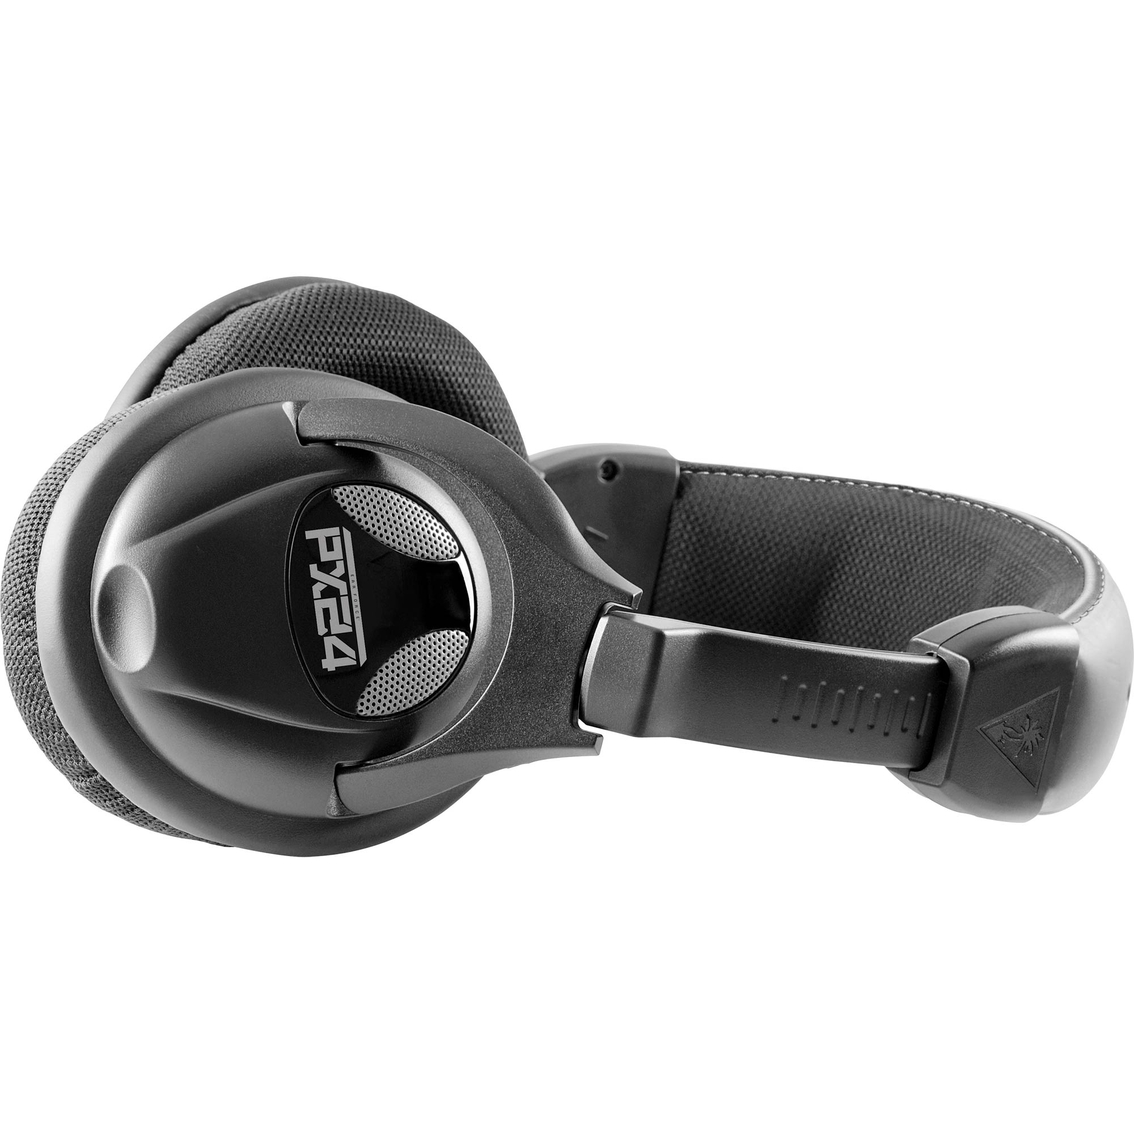 Turtle Beach Ear Force PX24 Gaming Headset - Image 3 of 4